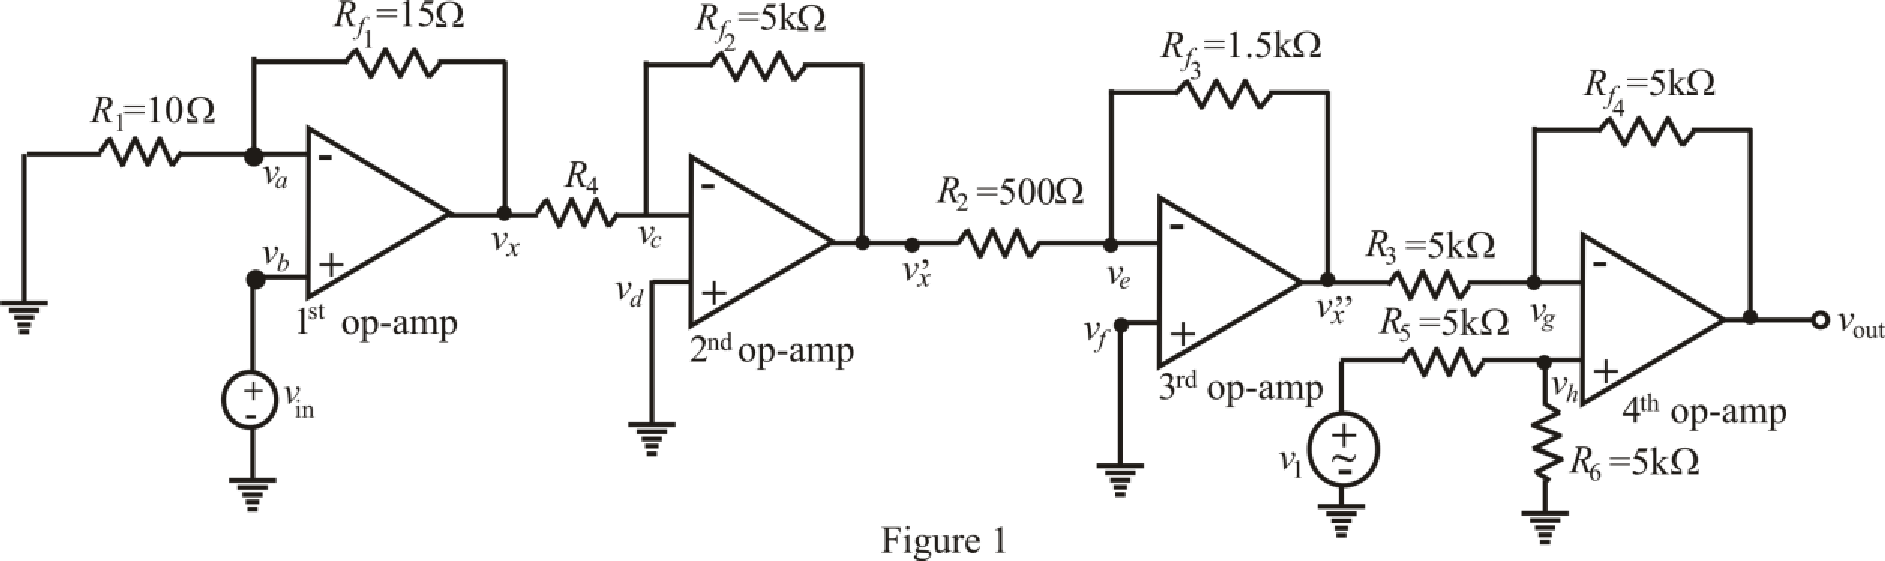 ENGINEERING CIRCUIT ANALYSIS ACCESS >I<, Chapter 6, Problem 24E 